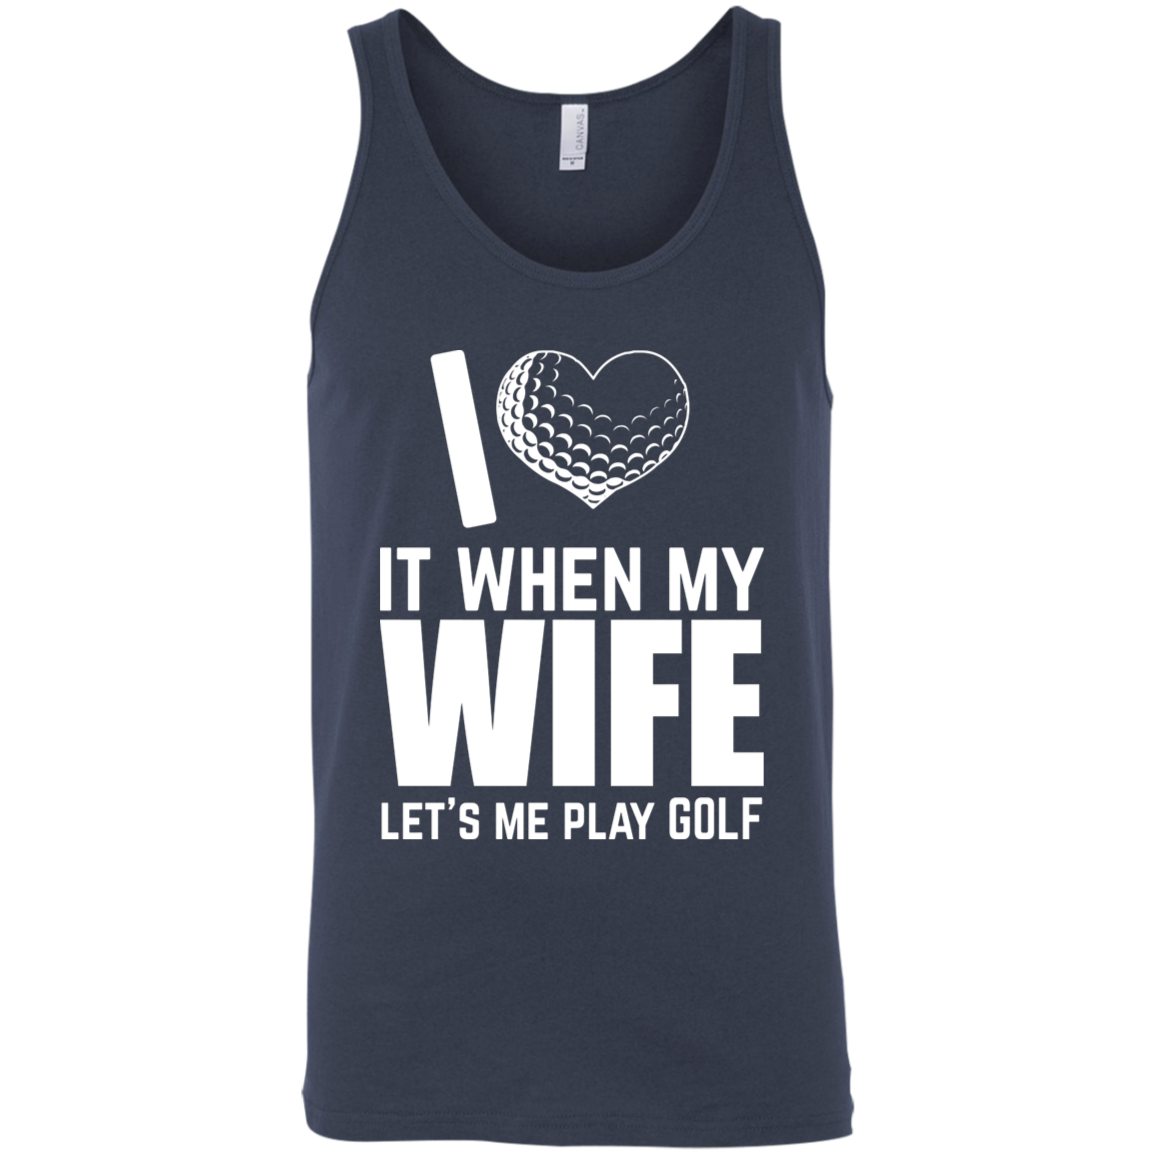 I Love It When My Wife Let Me Play Golf Tank Top Apparel - The Beer Lodge